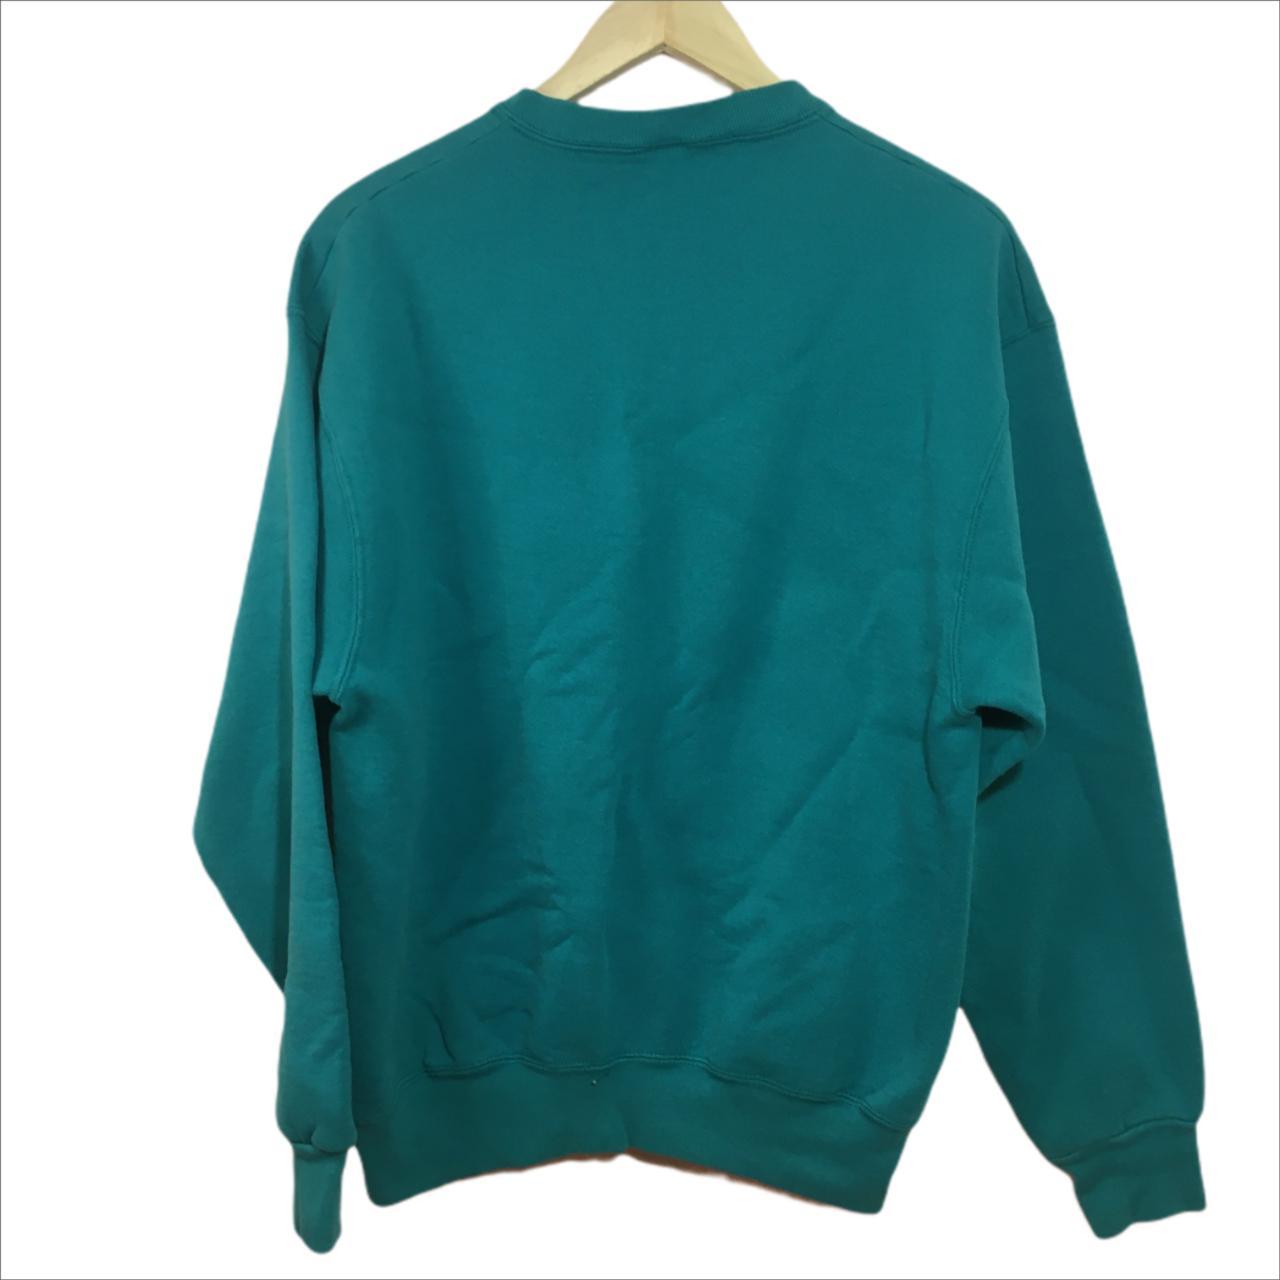 Product Image 3 - L Vintage 80s/90s Blank BVD